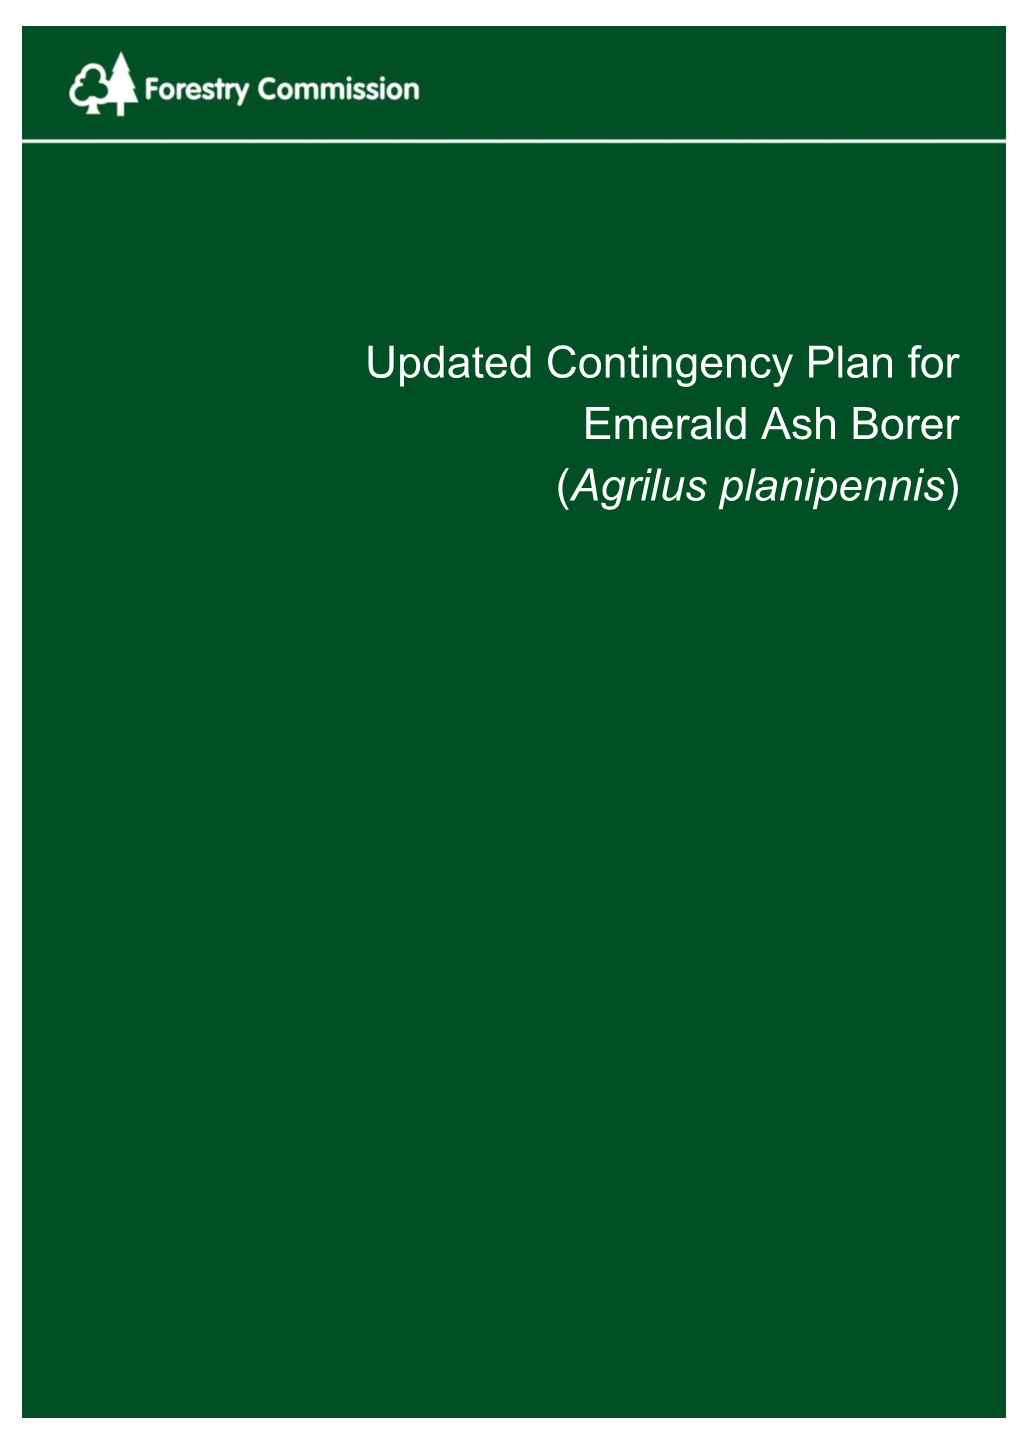 Updated Contingency Plan for Emerald Ash Borer (Agrilus Planipennis)